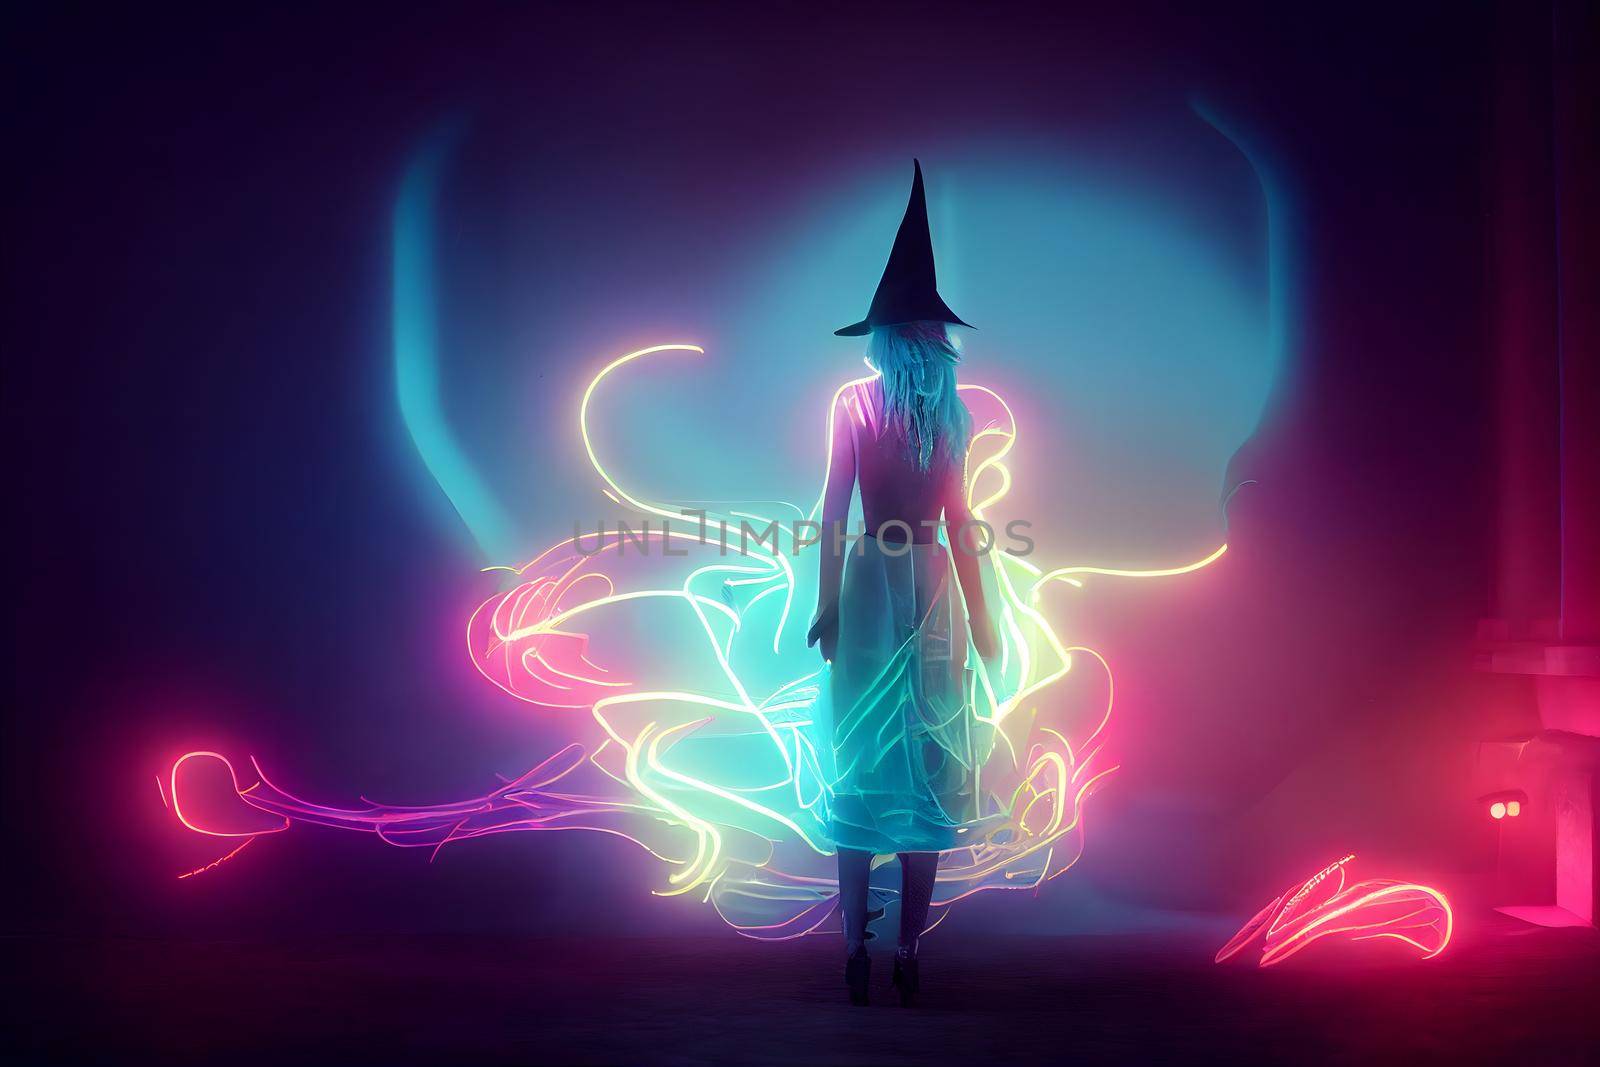 dreamy unrecognizable woman silhouette with colorful neon fumes black conical judenhat, neural network generated art. Digitally generated image. Not based on any actual scene or pattern.